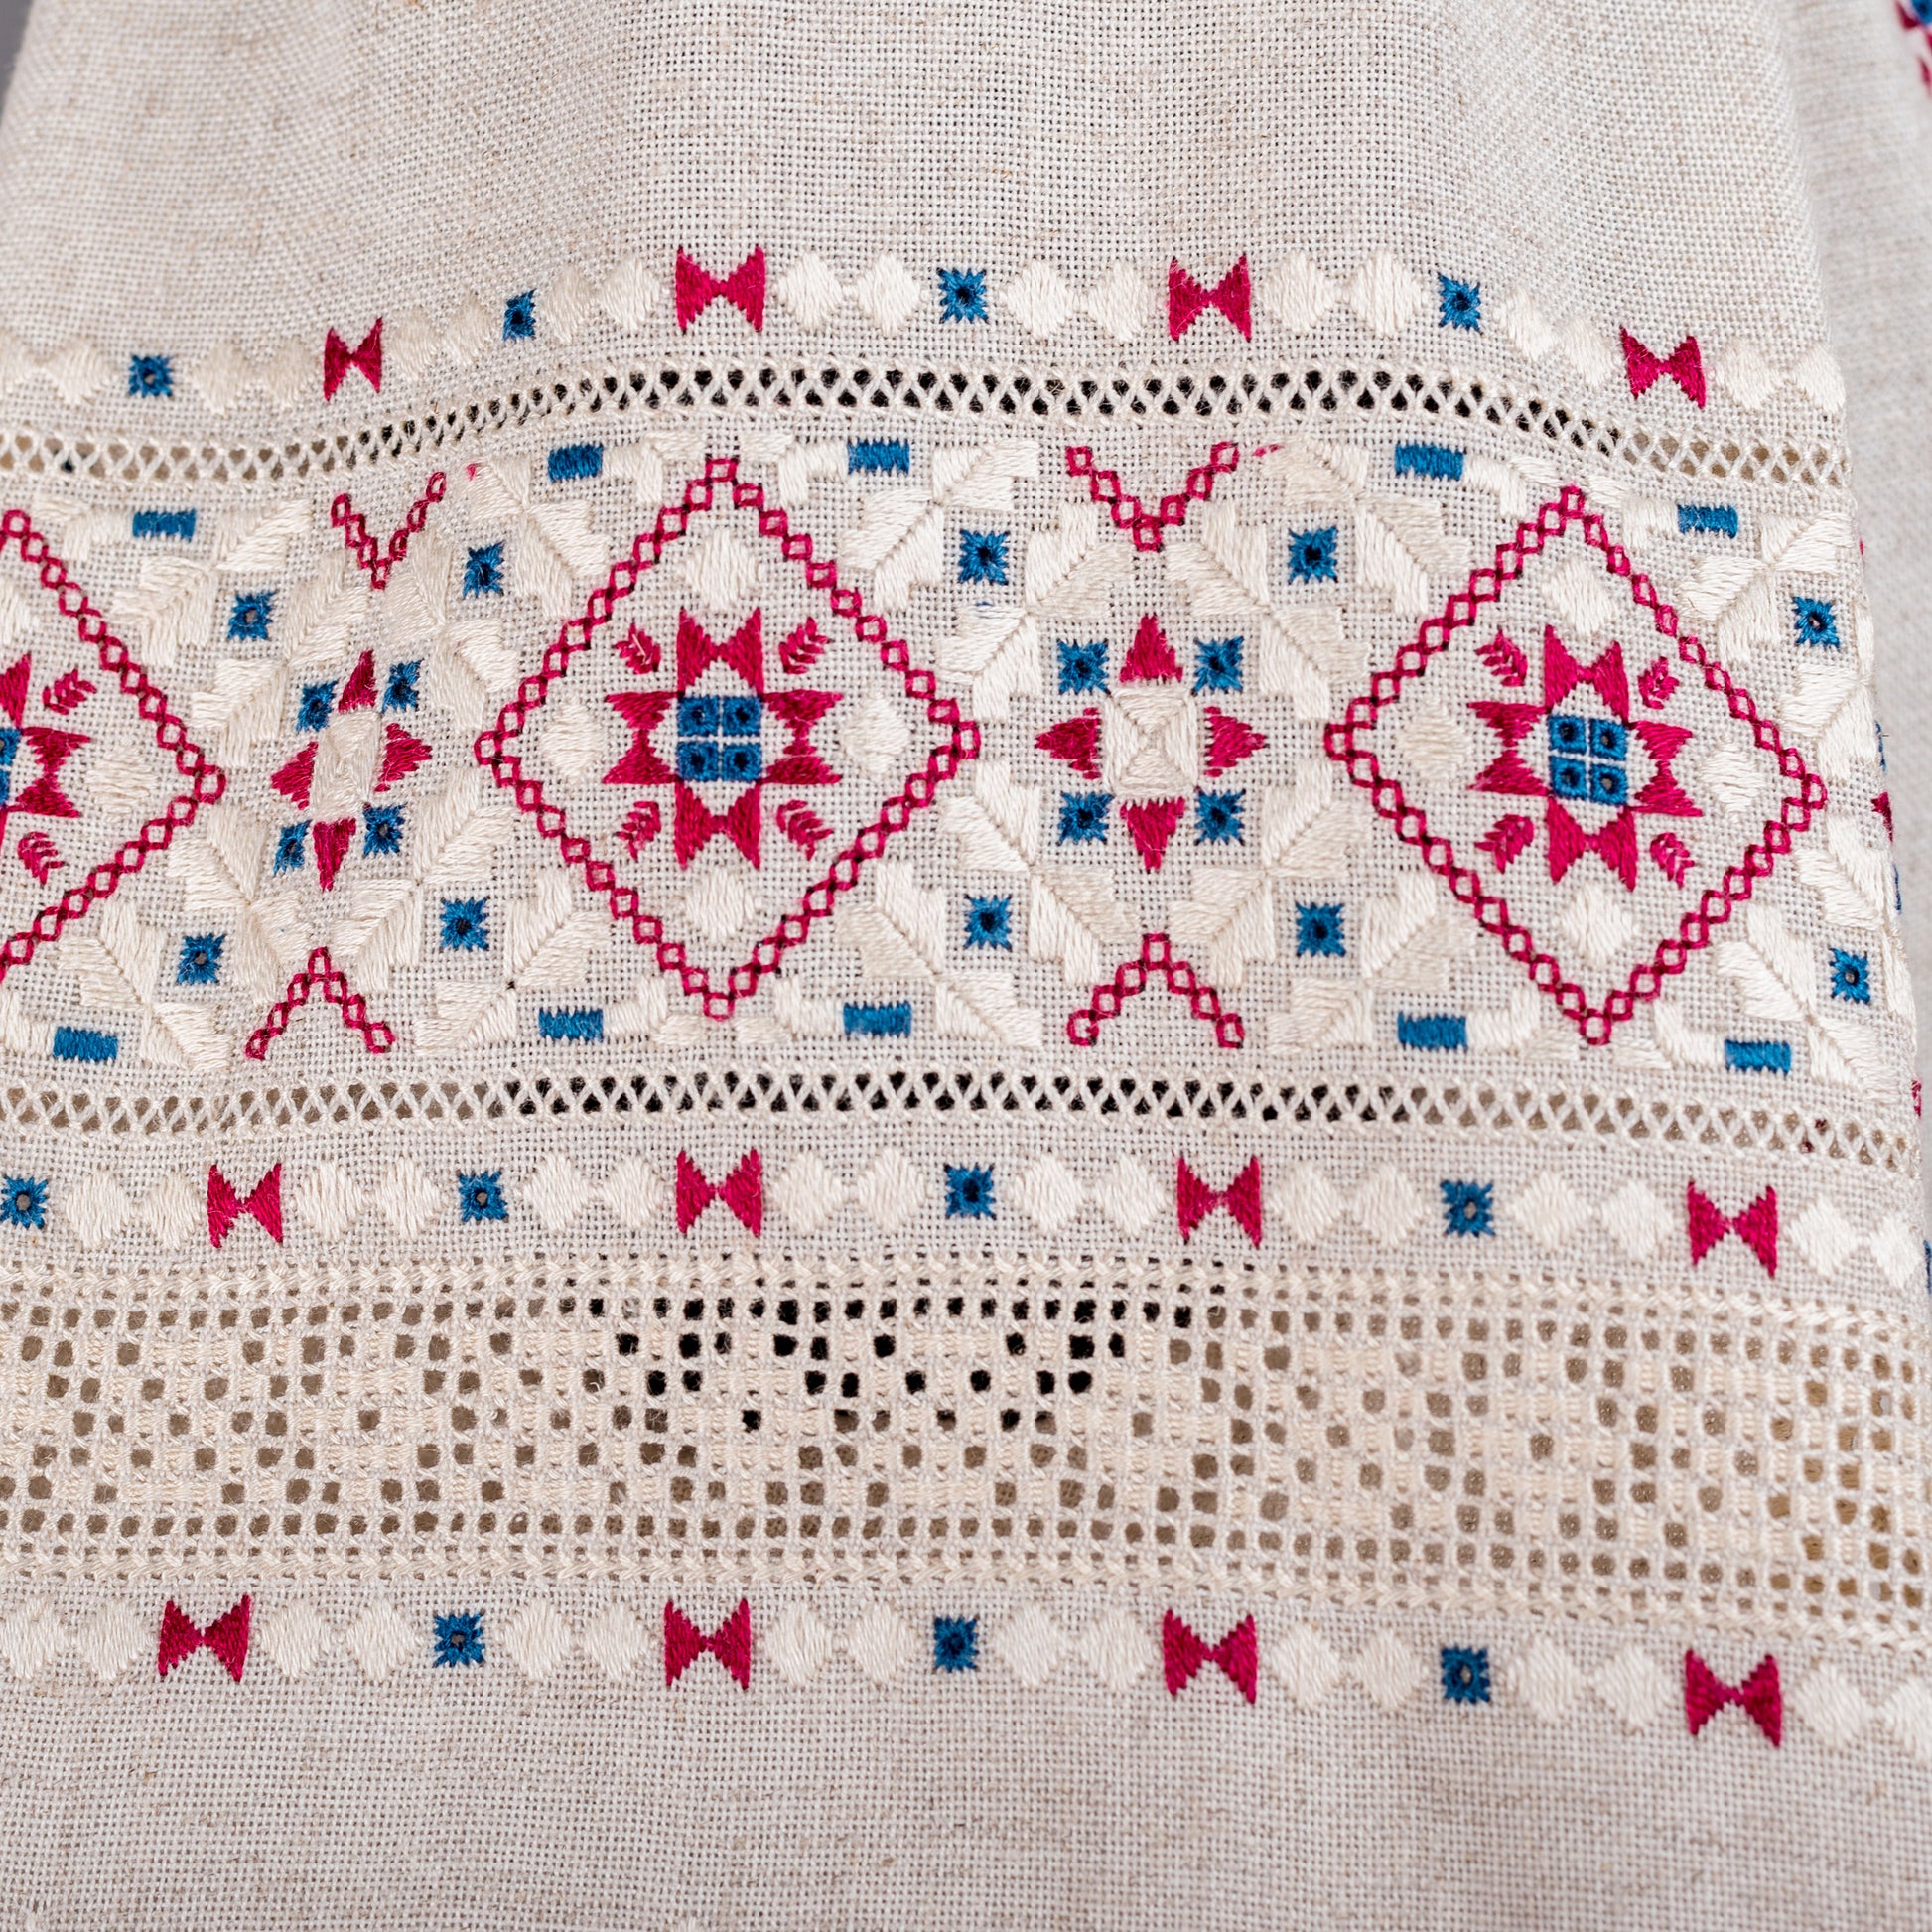 WOMENSART on X: Traditional Polish folk embroidery with